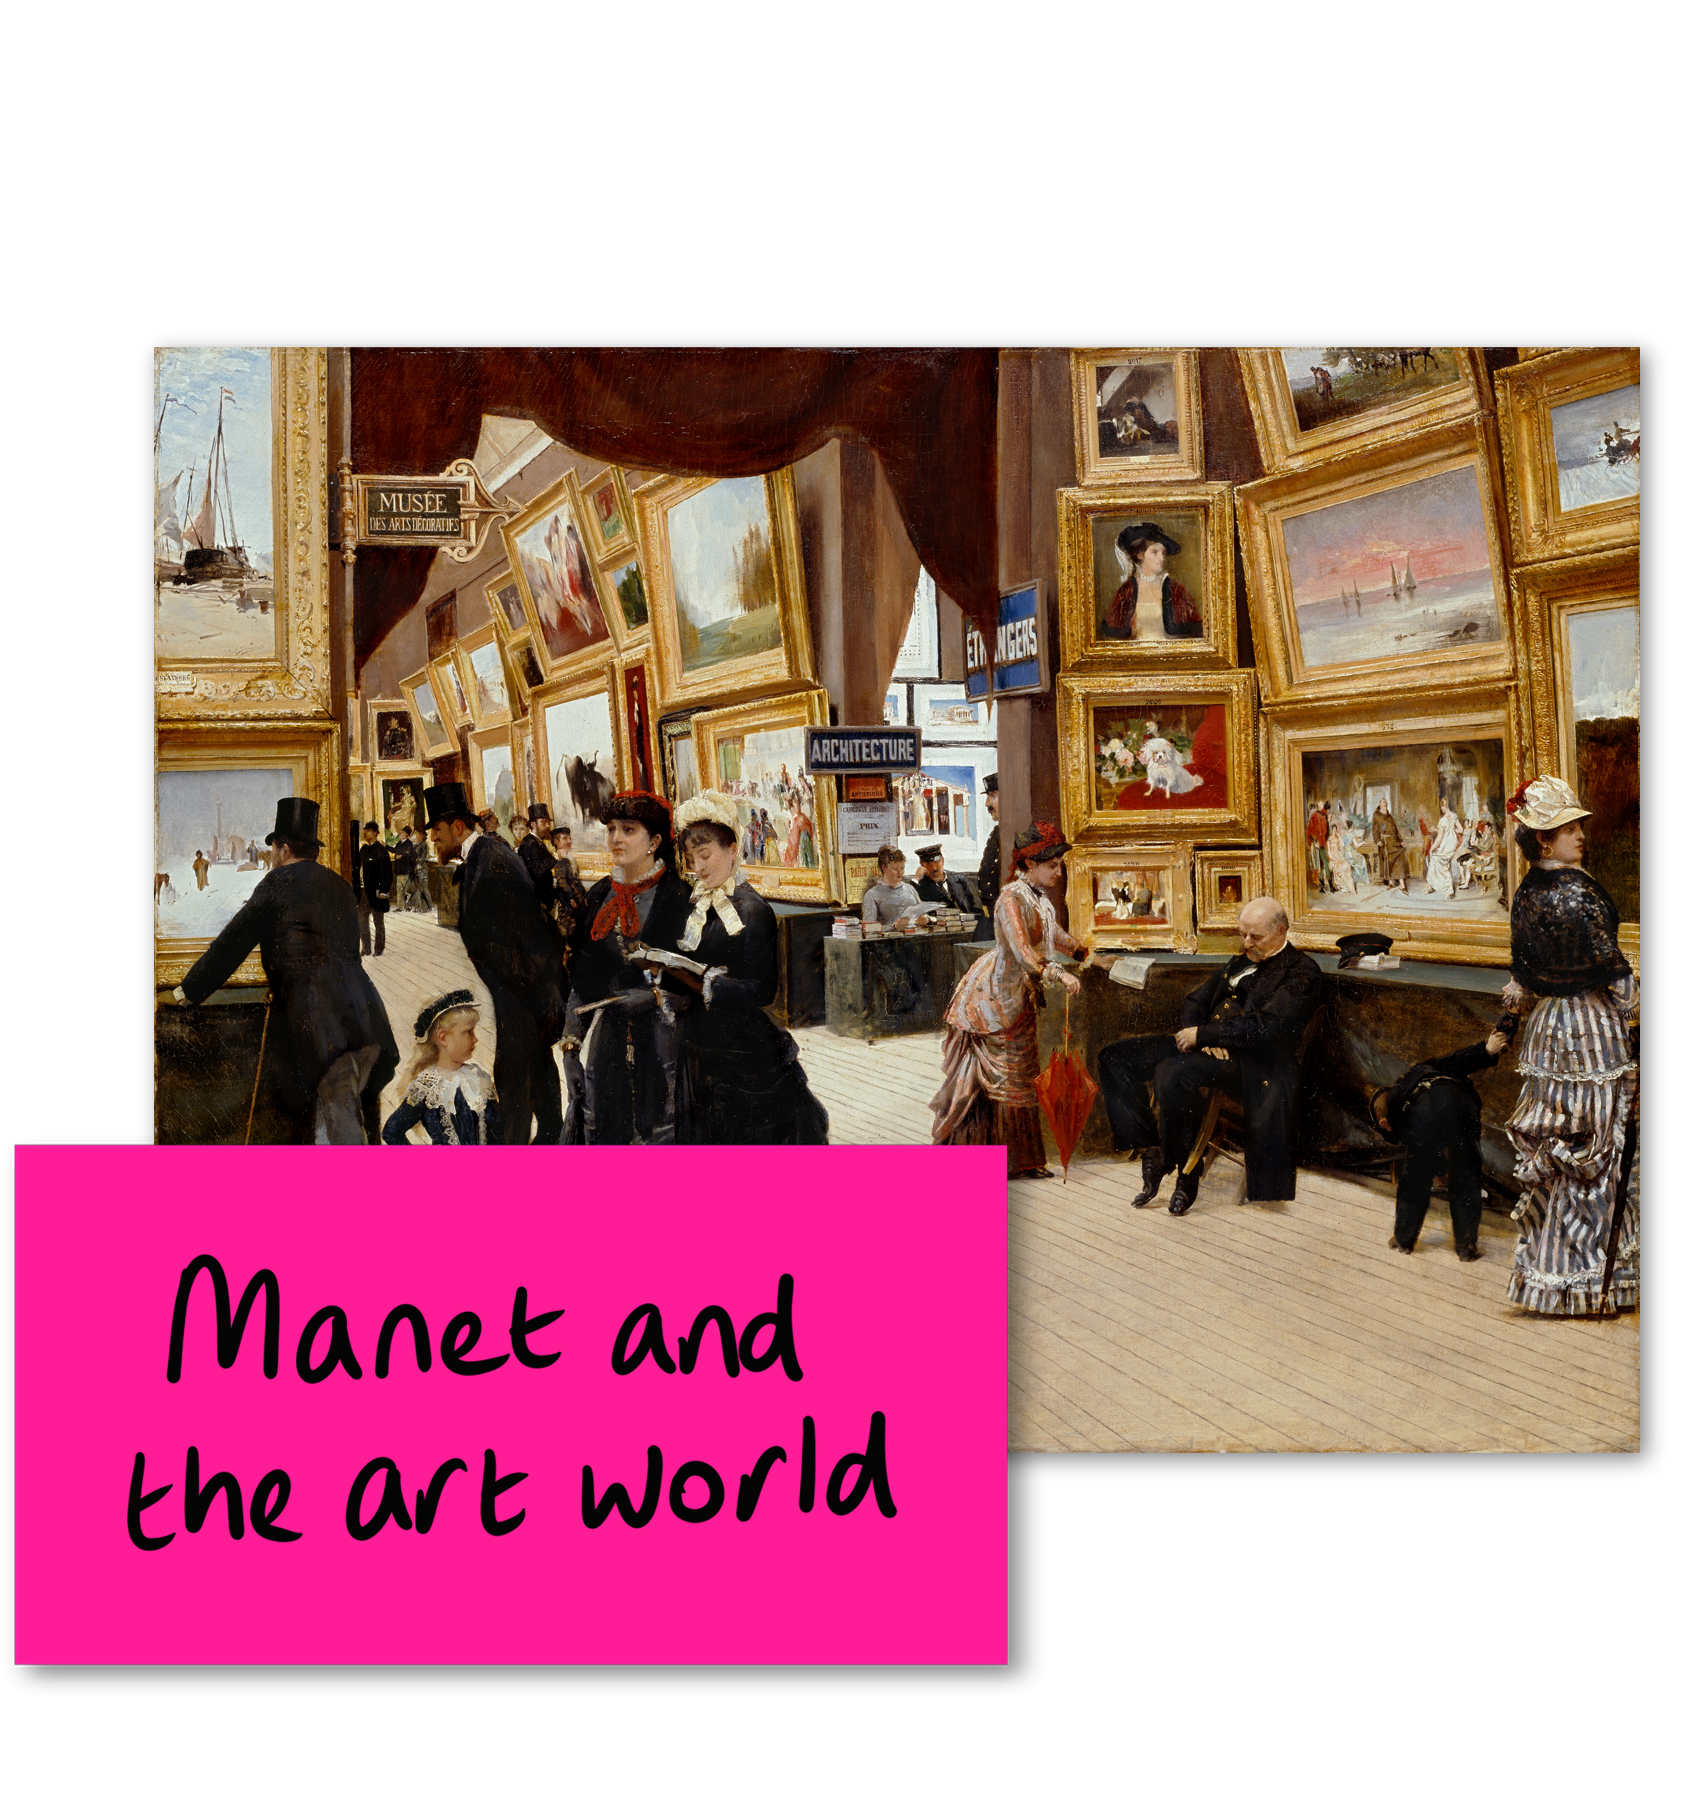 Manet and the art world with image of the salon